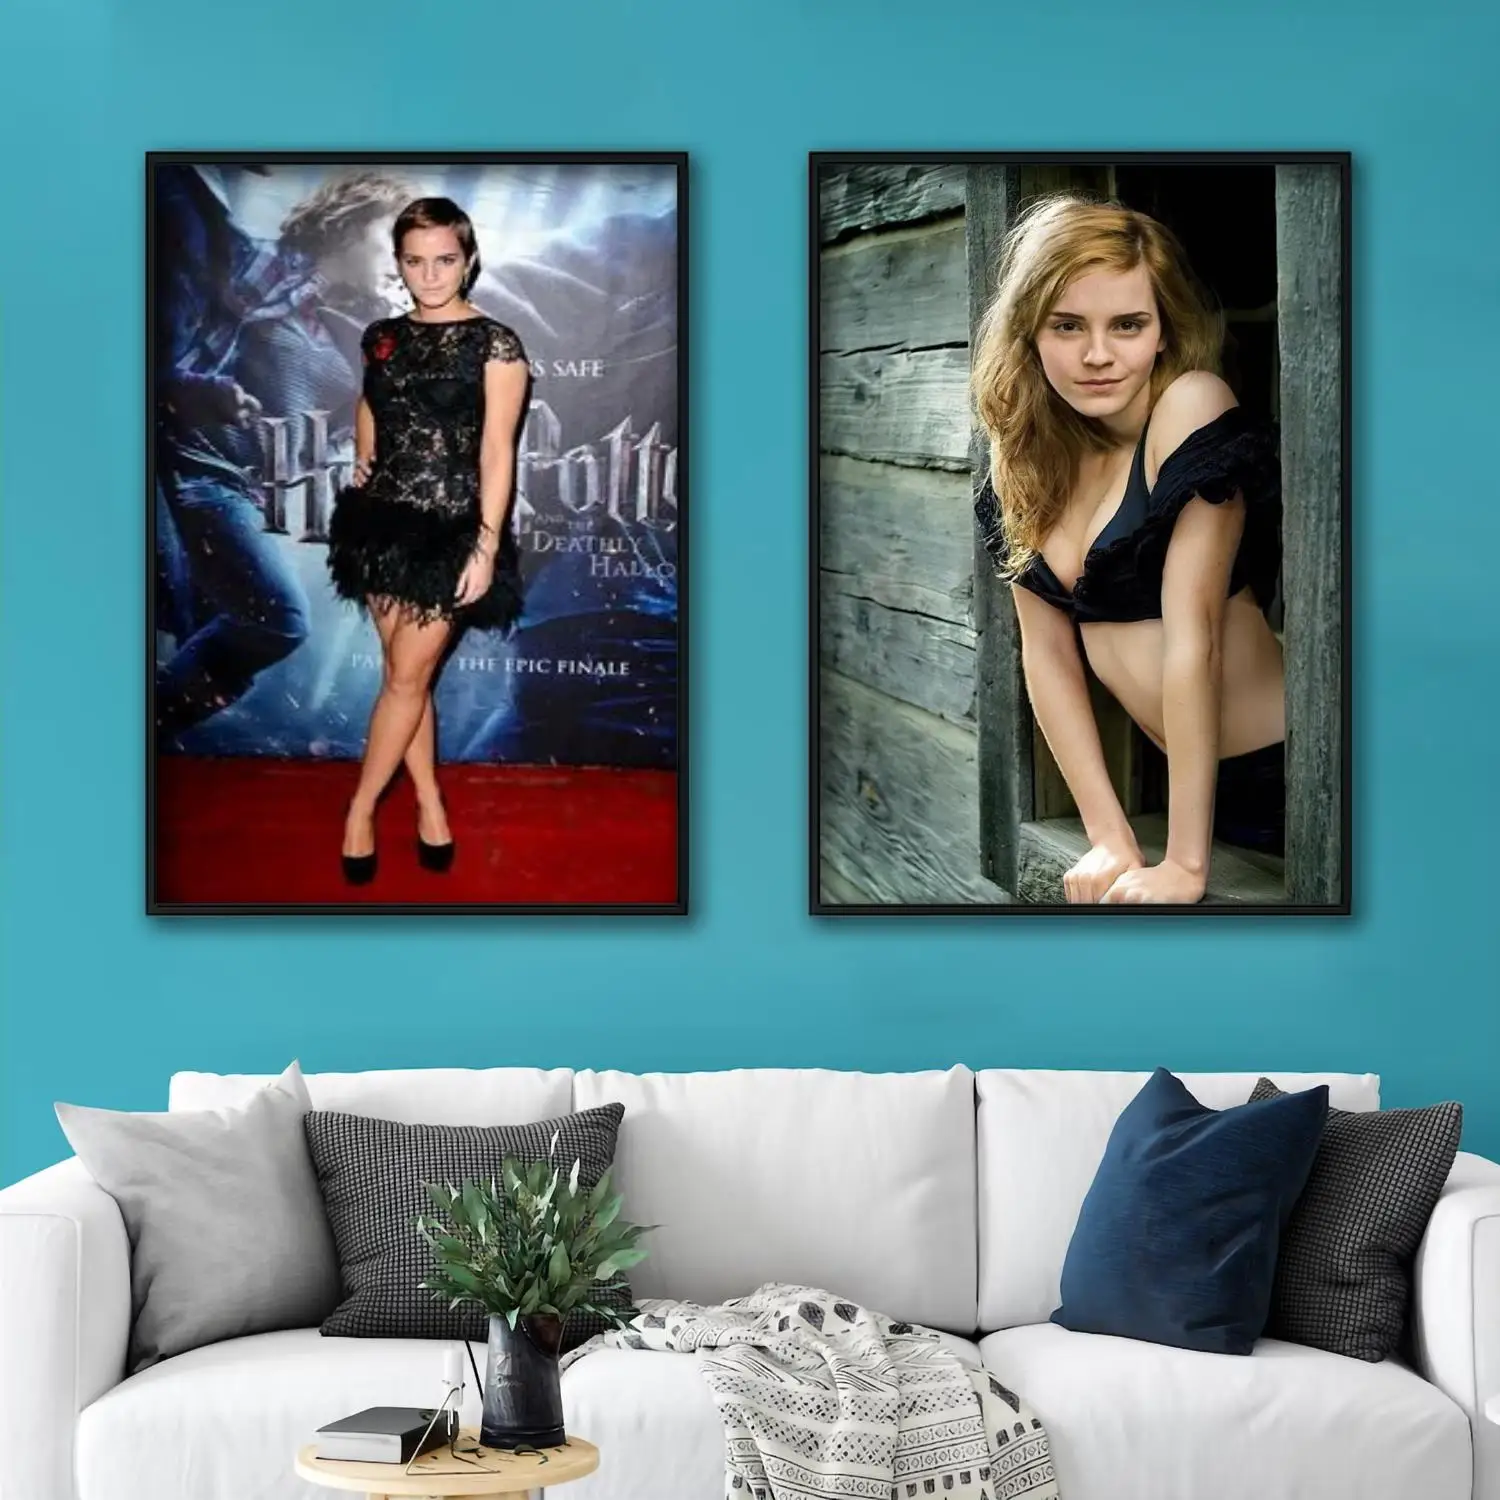 

Emma watson Decorative Canvas Posters Room Bar Cafe Decor Gift Print Art Wall Paintings